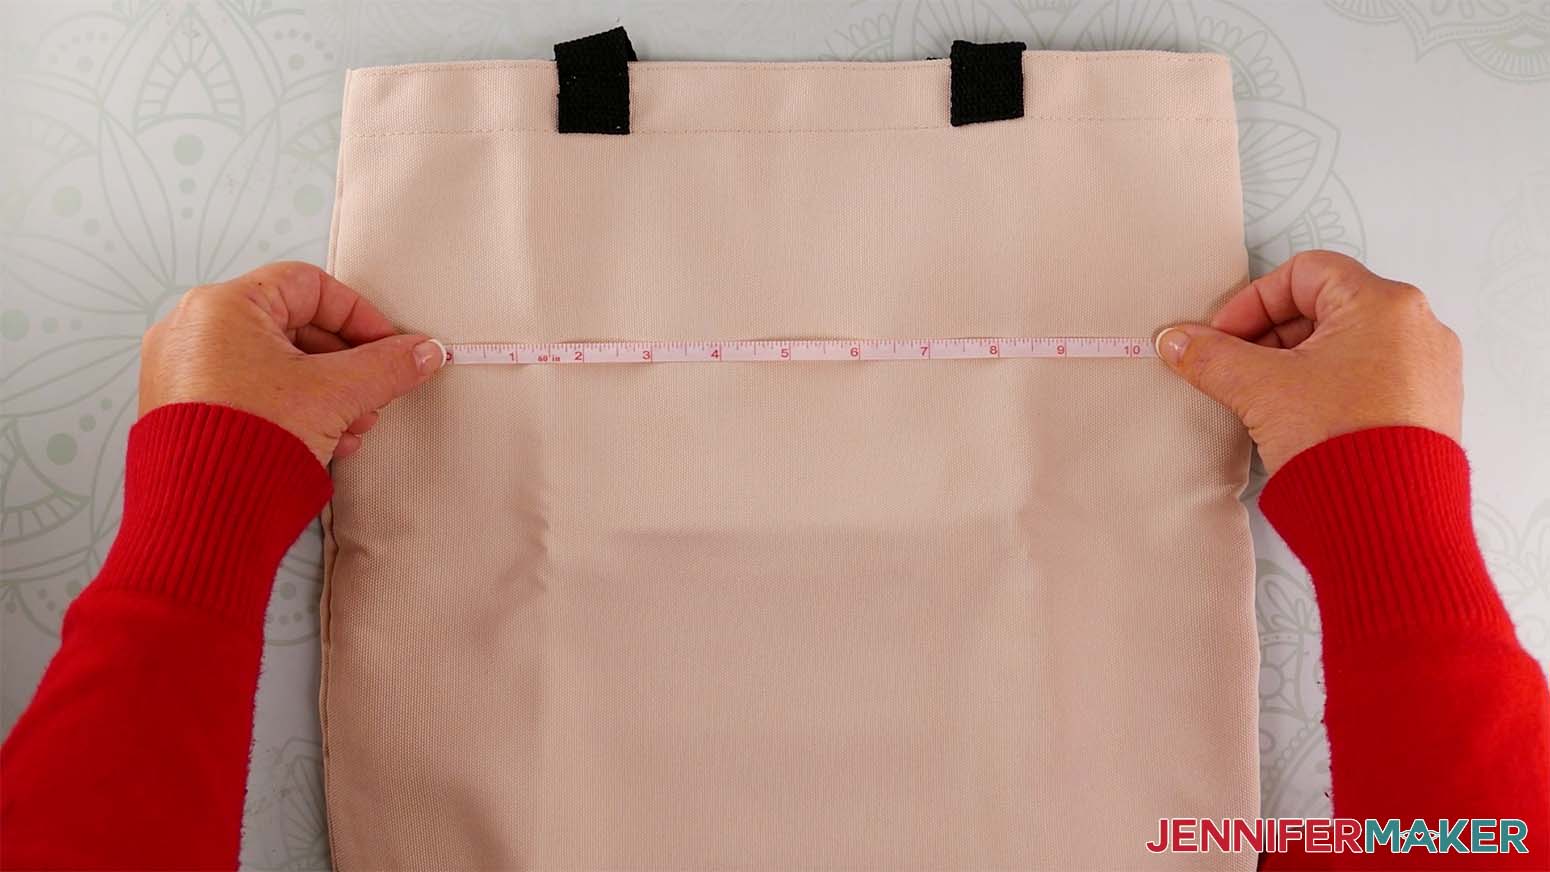 Image showing to use a measuring tape to measure the available space to use on the tote bag.